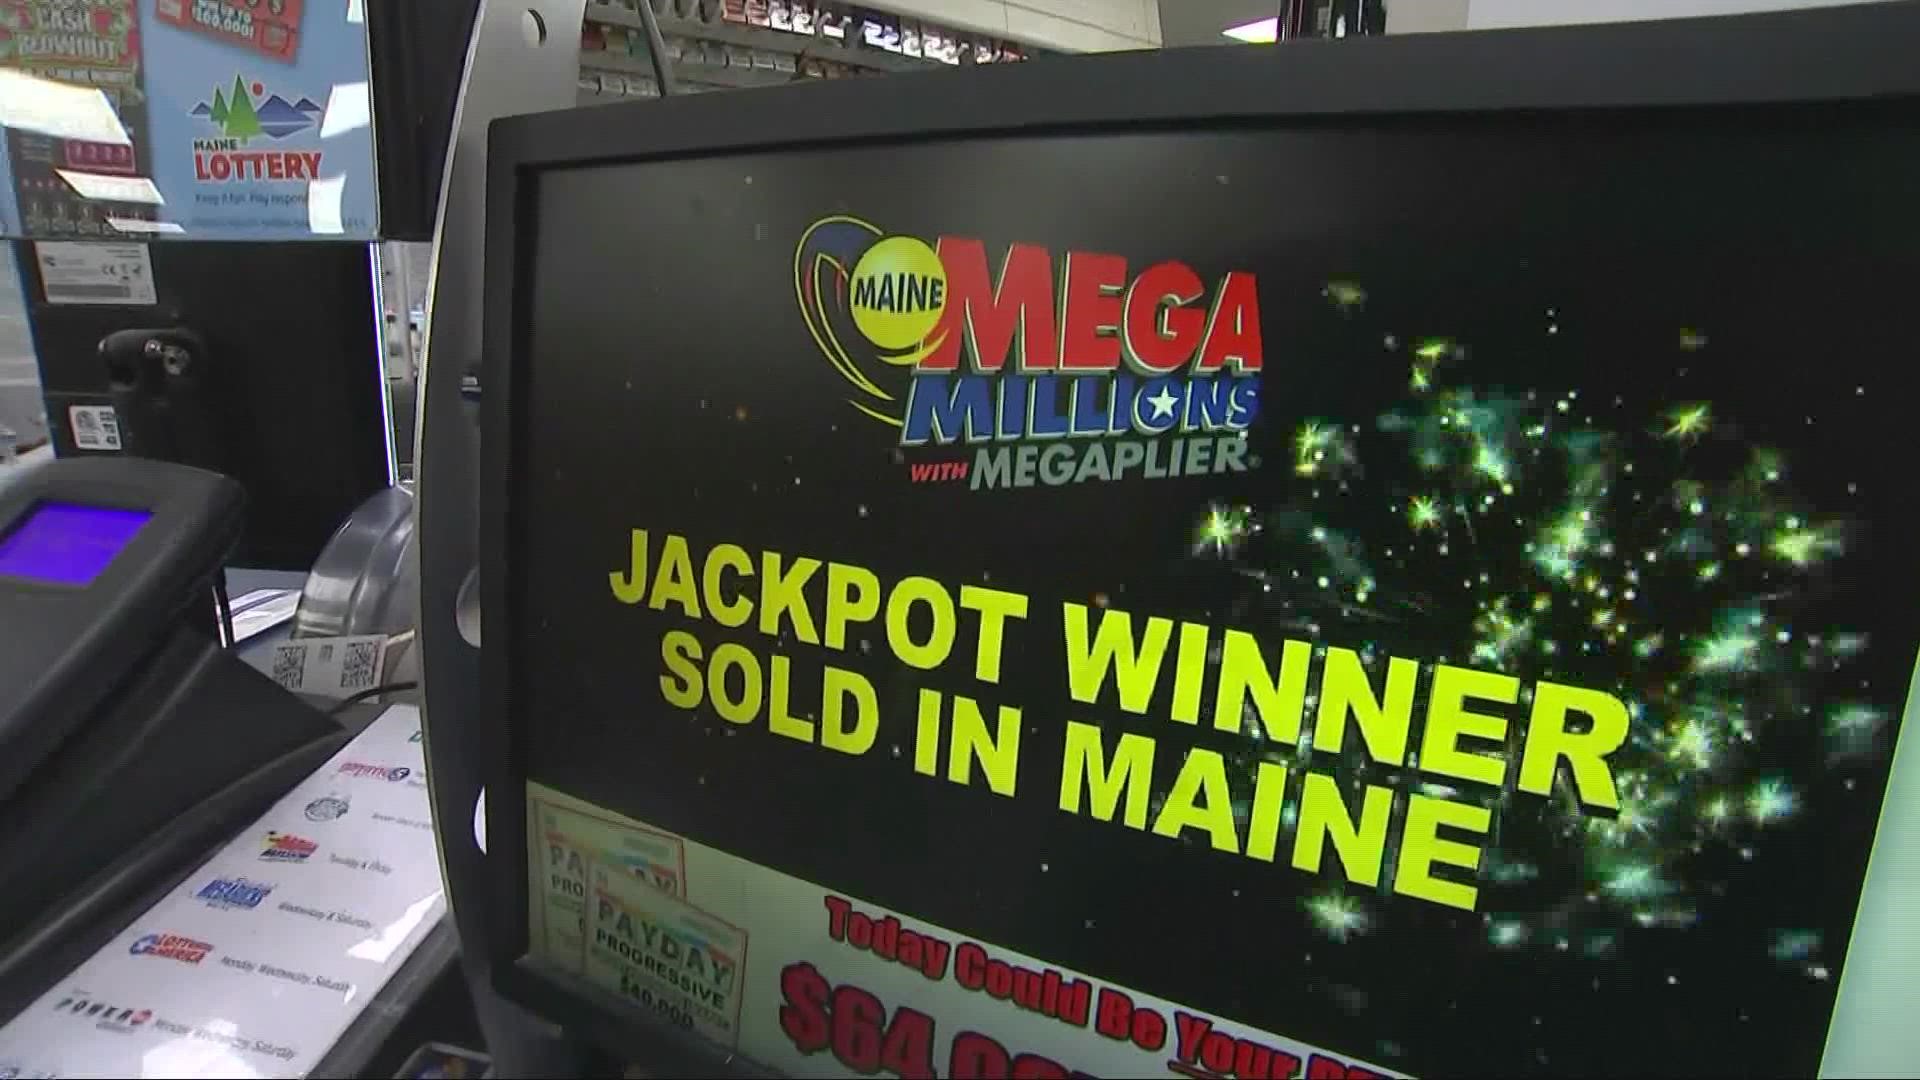 The winning ticket for the second largest Mega Millions lottery jackpot was sold in Maine.